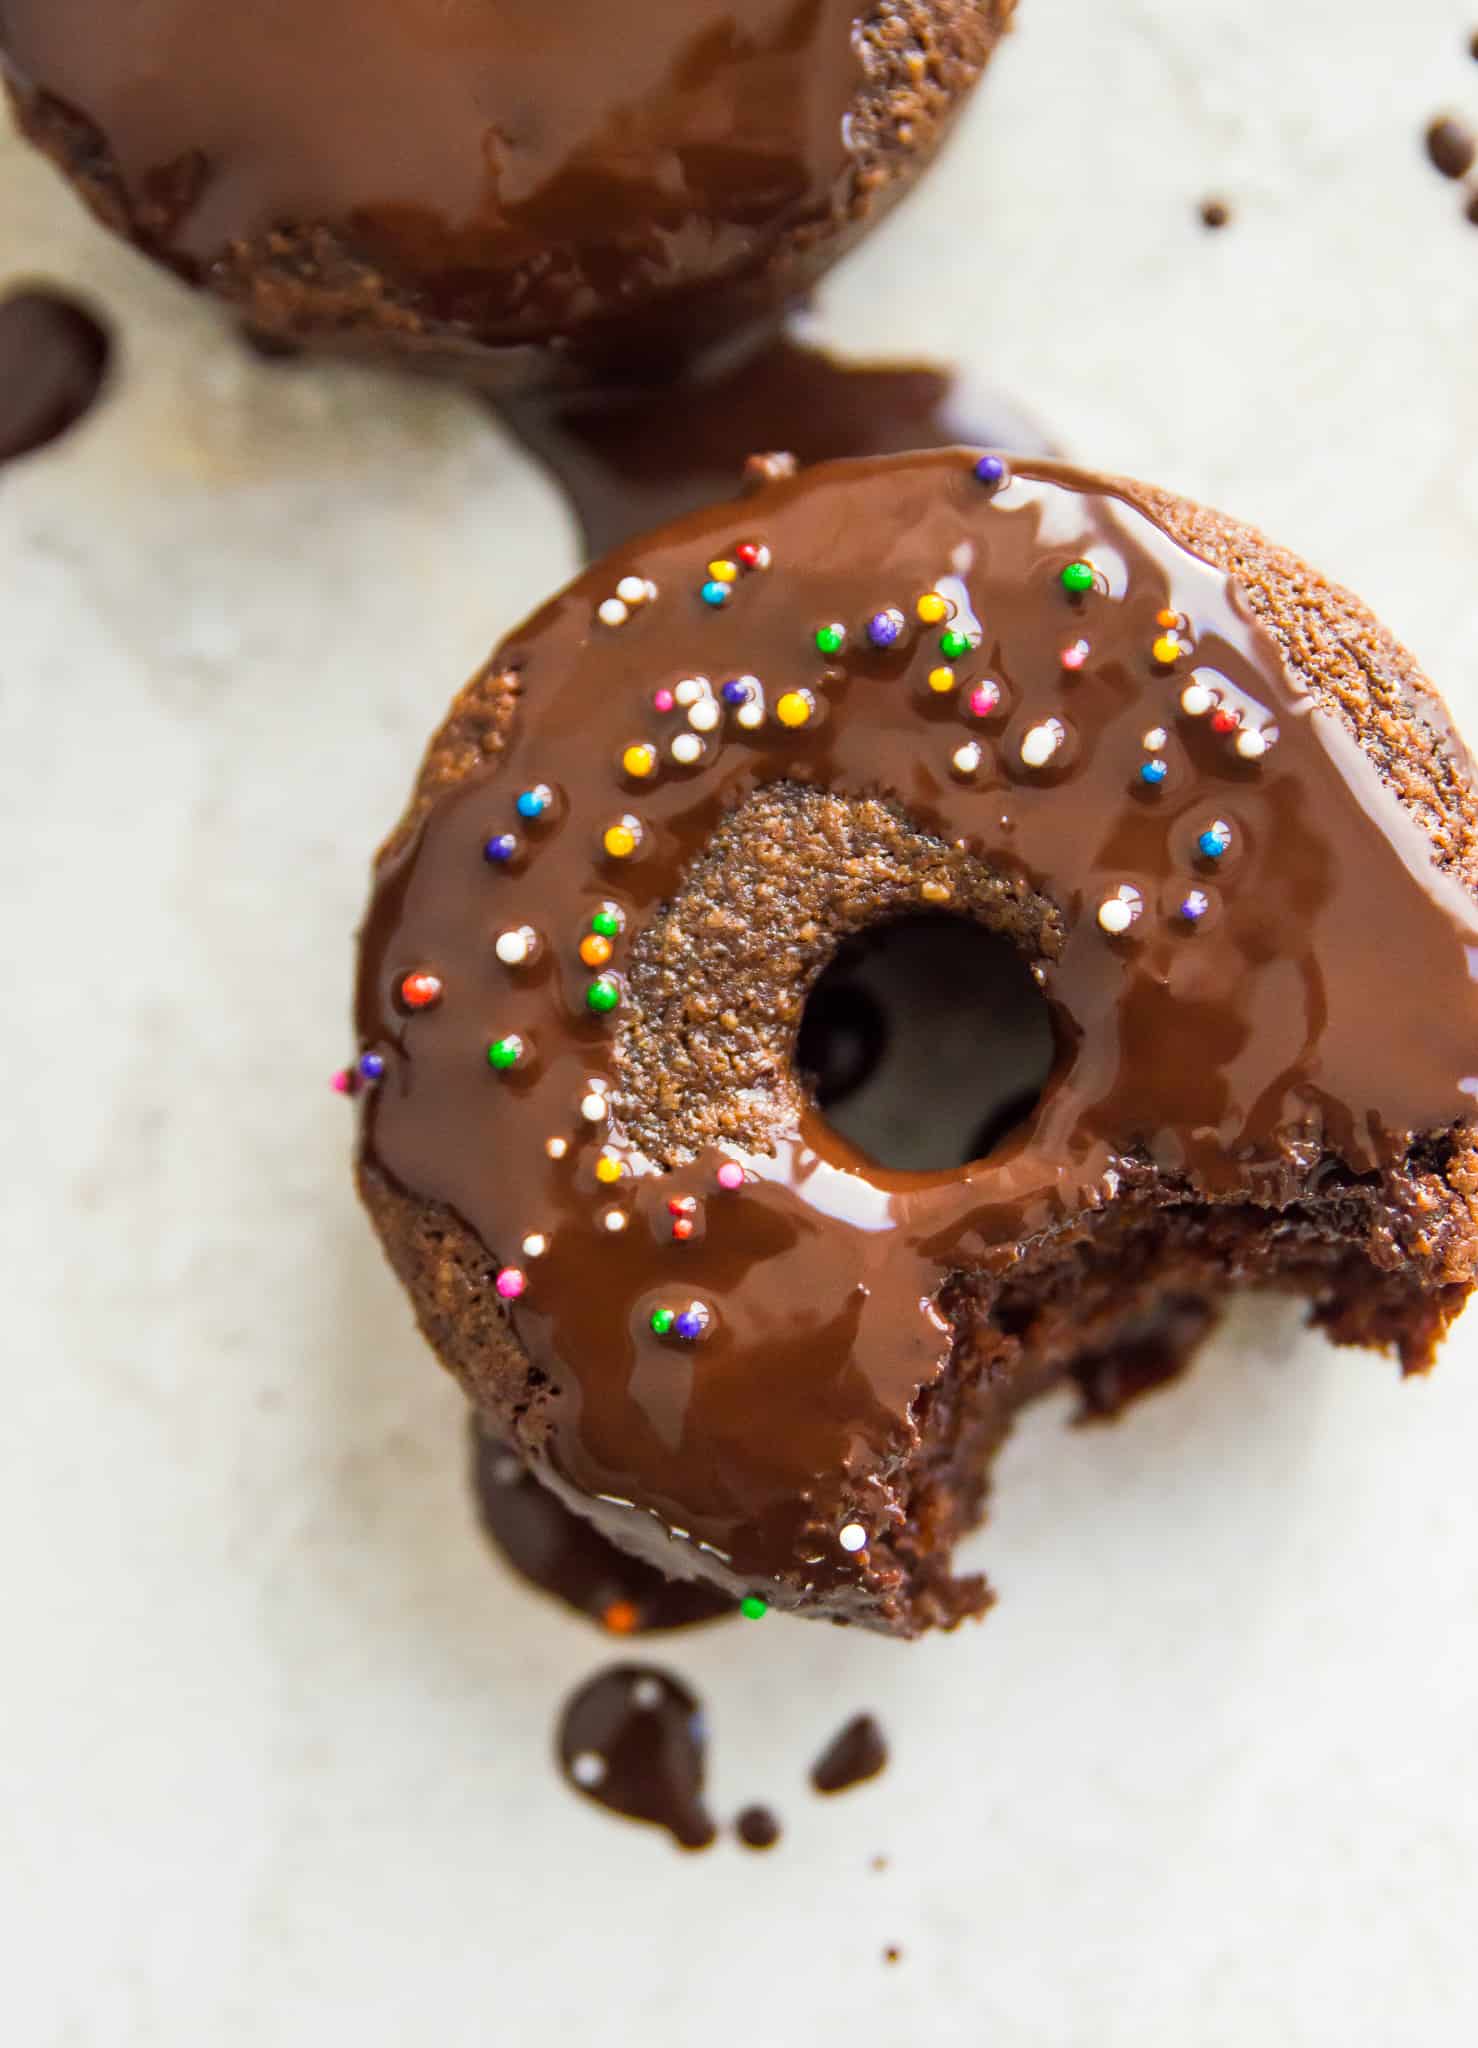 A paleo chocolate donut with a bite out of it and icing on top.